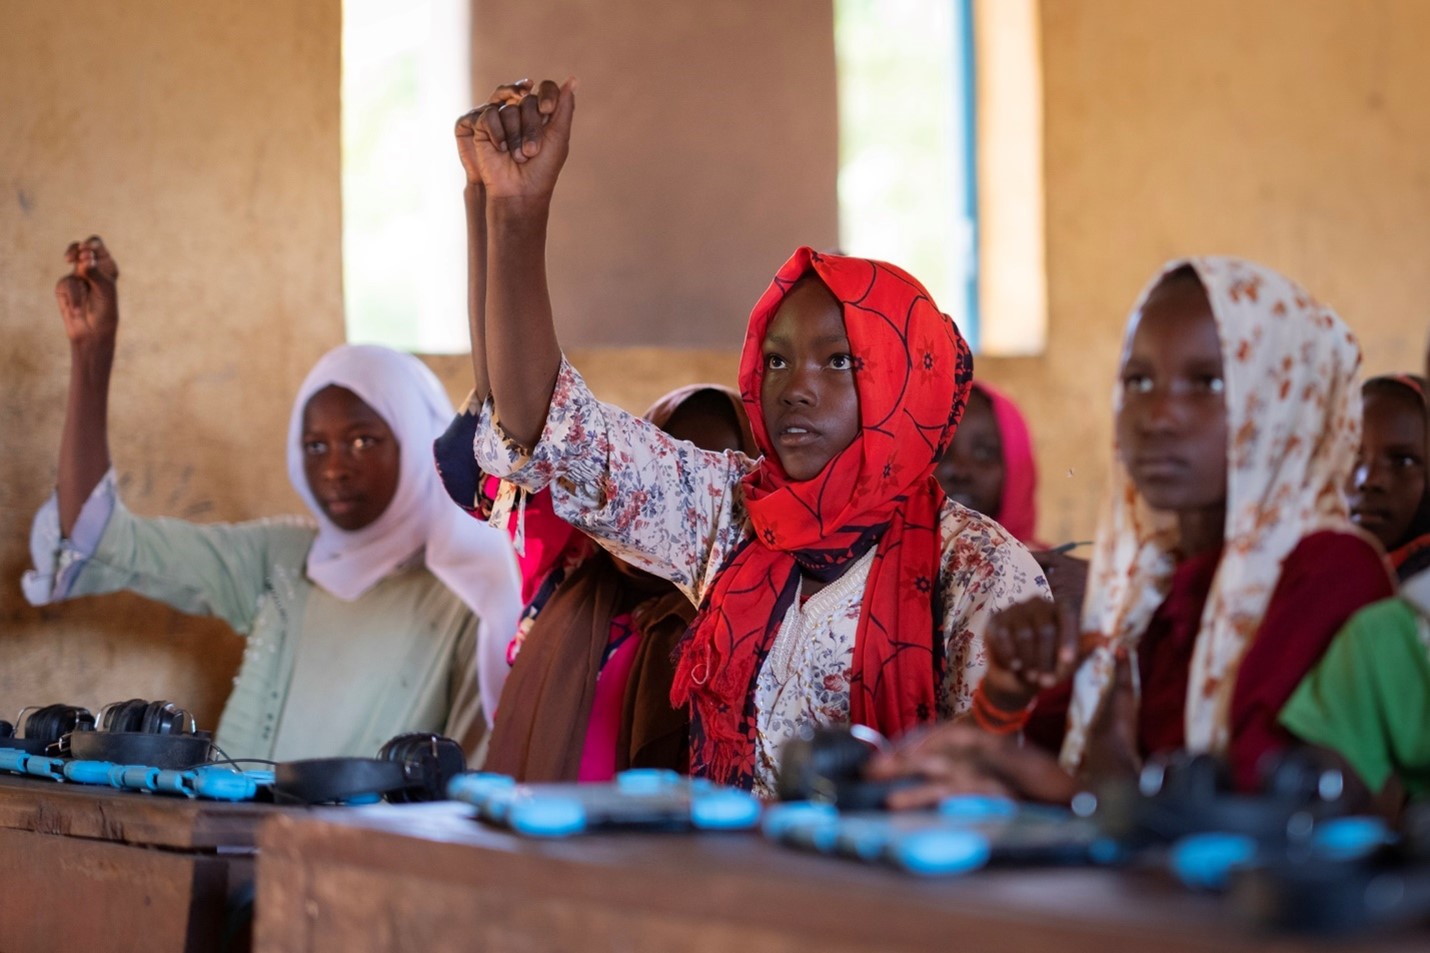 14-year-old student Sumaya Abdel Rahman Mahmoud Mohamad, centre, raises her hand during a lesson, part of an EdTech program developed by War Child named Cant Wait to Learn, at a school in Djabel Refugee Camp, Eastern Chad.